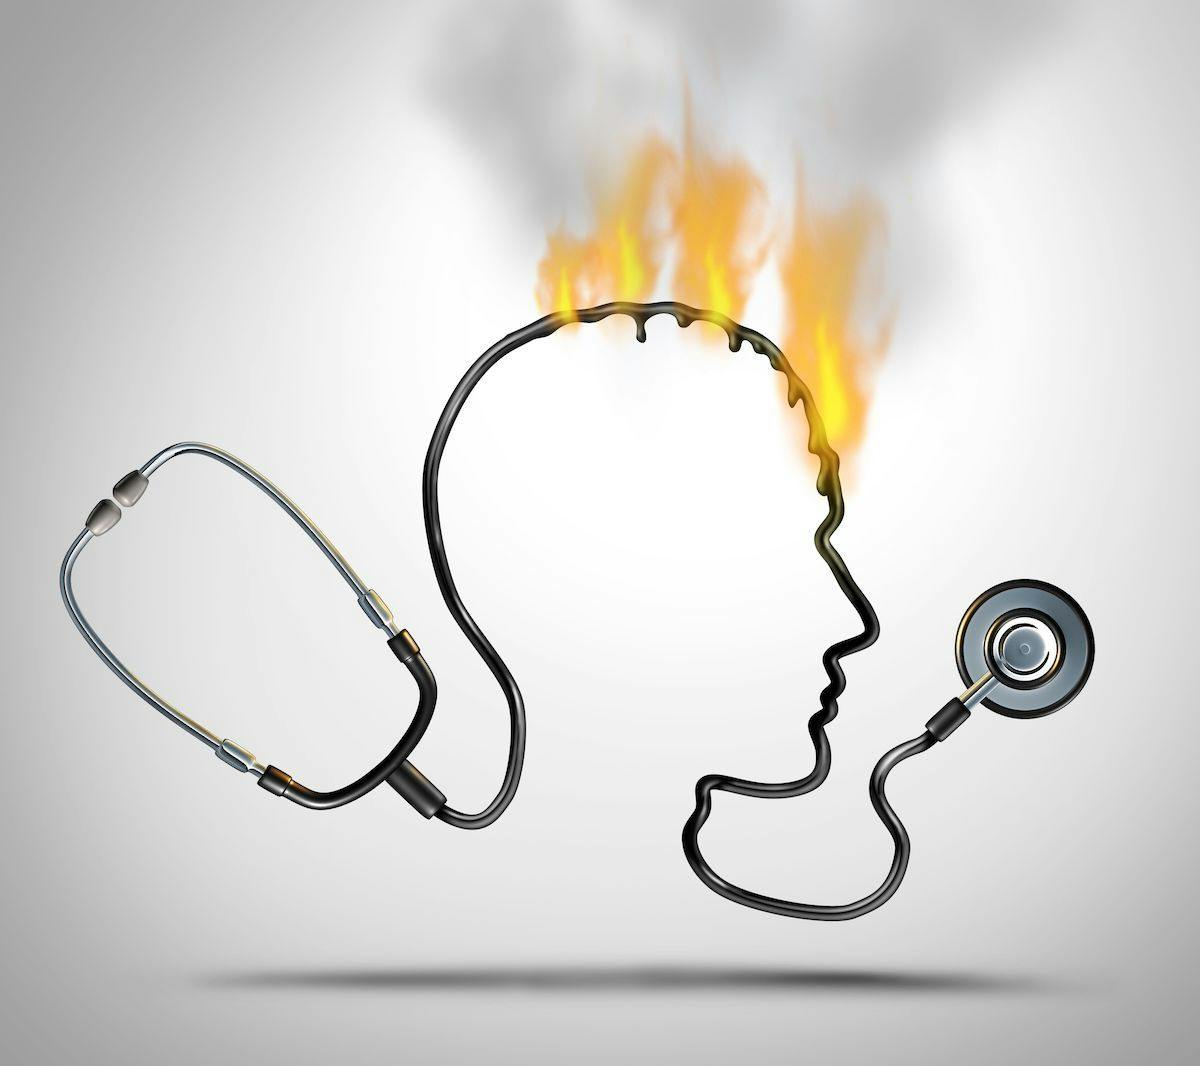 Why improving communication can reduce physician burnout